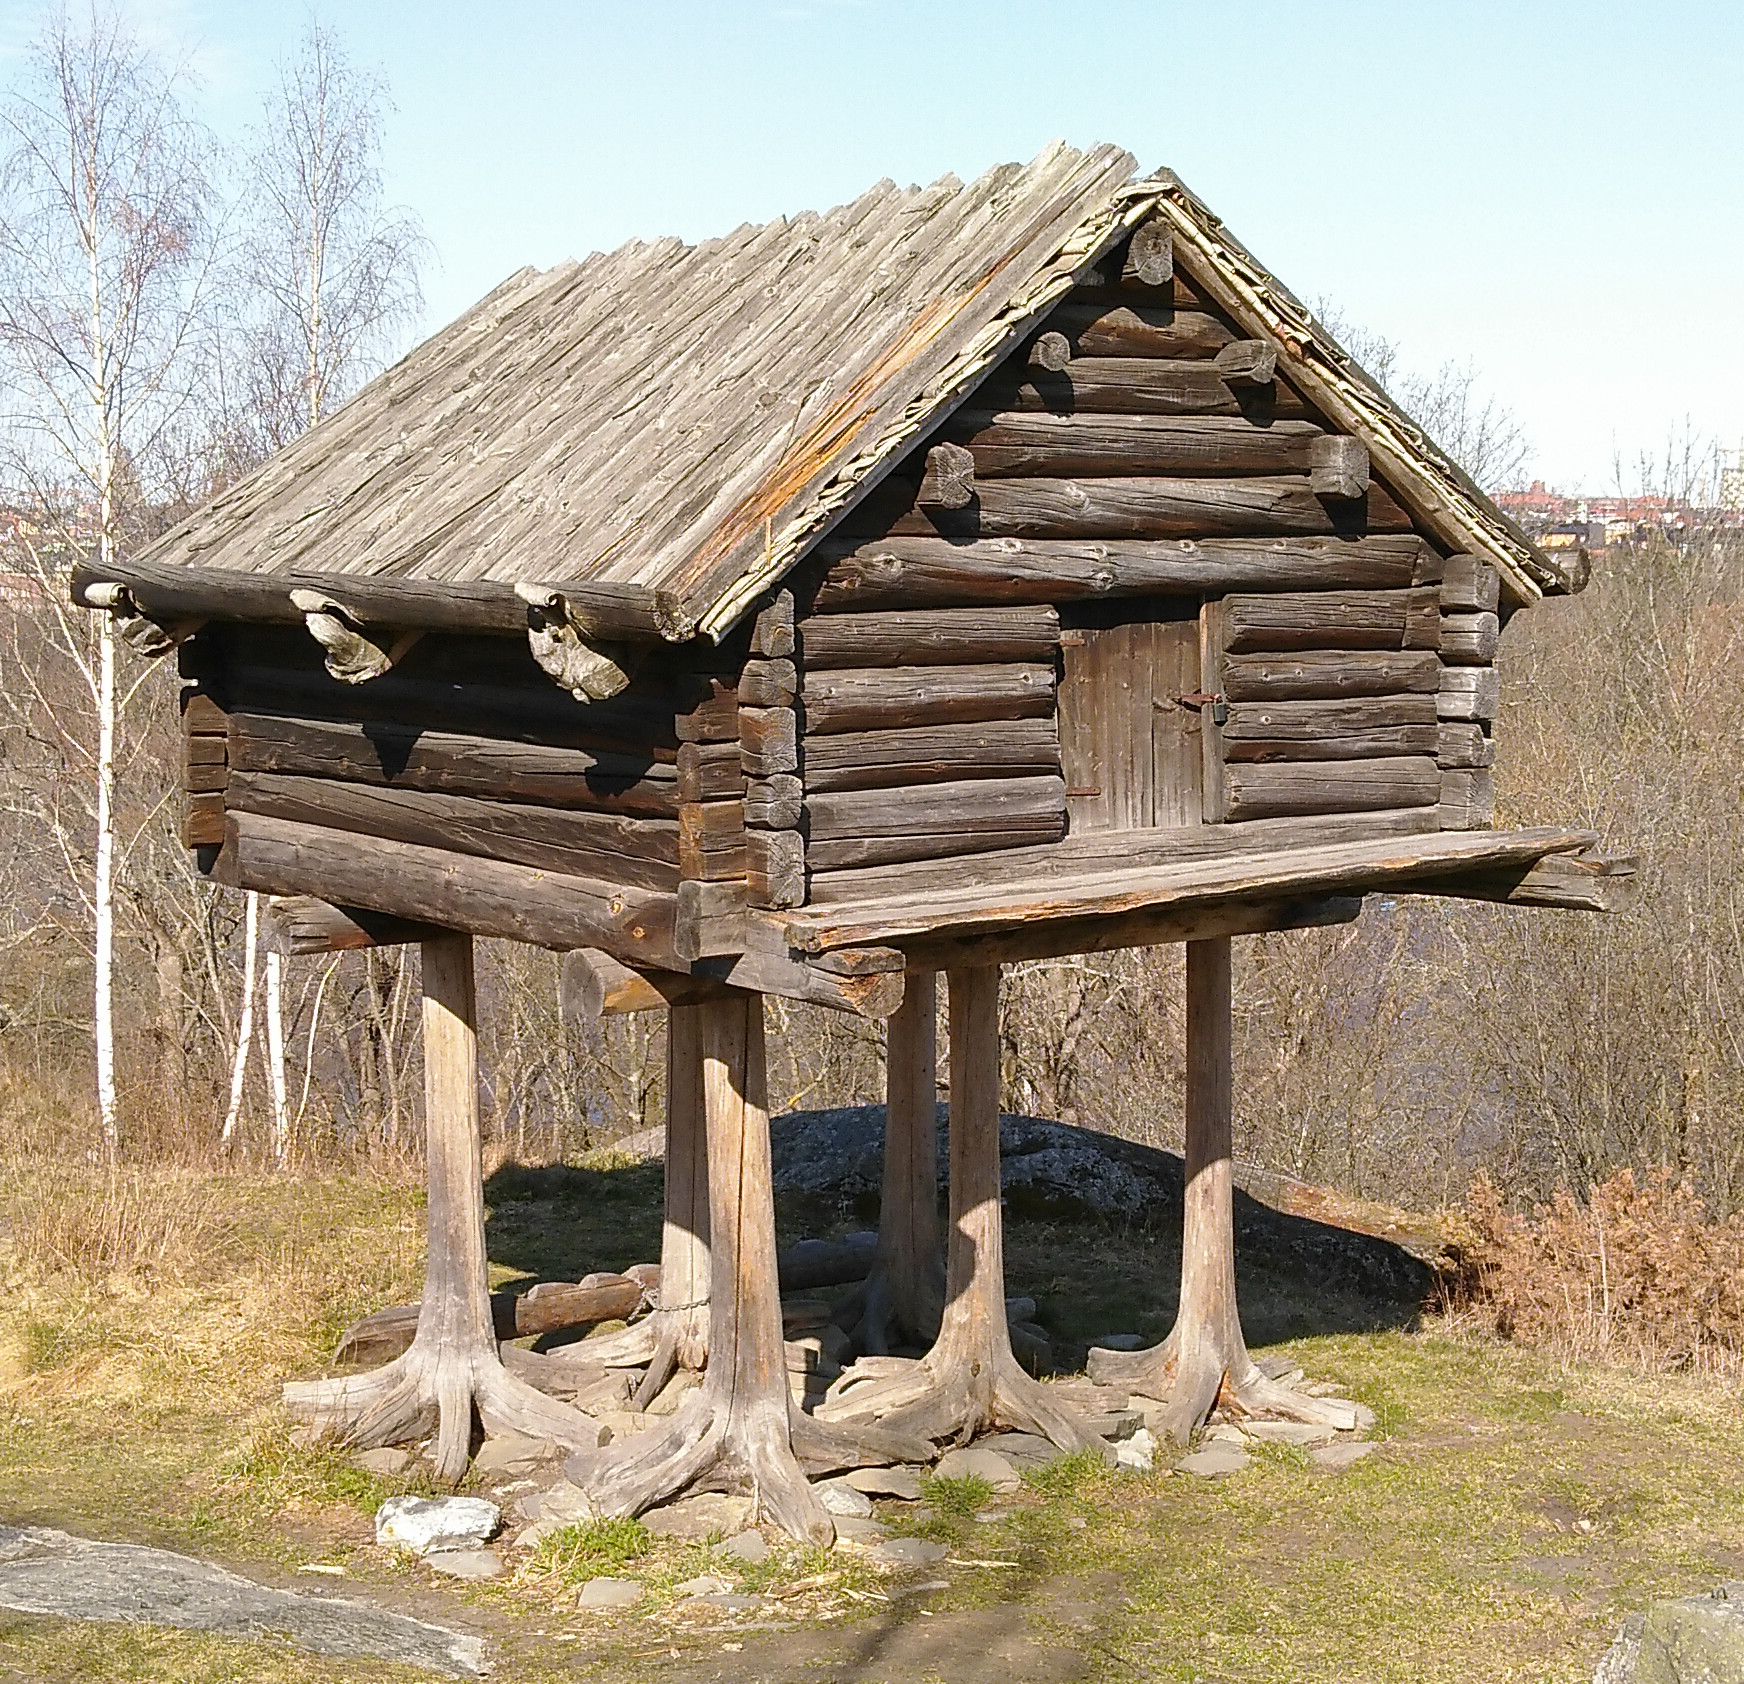 A traditional sami storehouse, elevated to protect the food from animals and snow